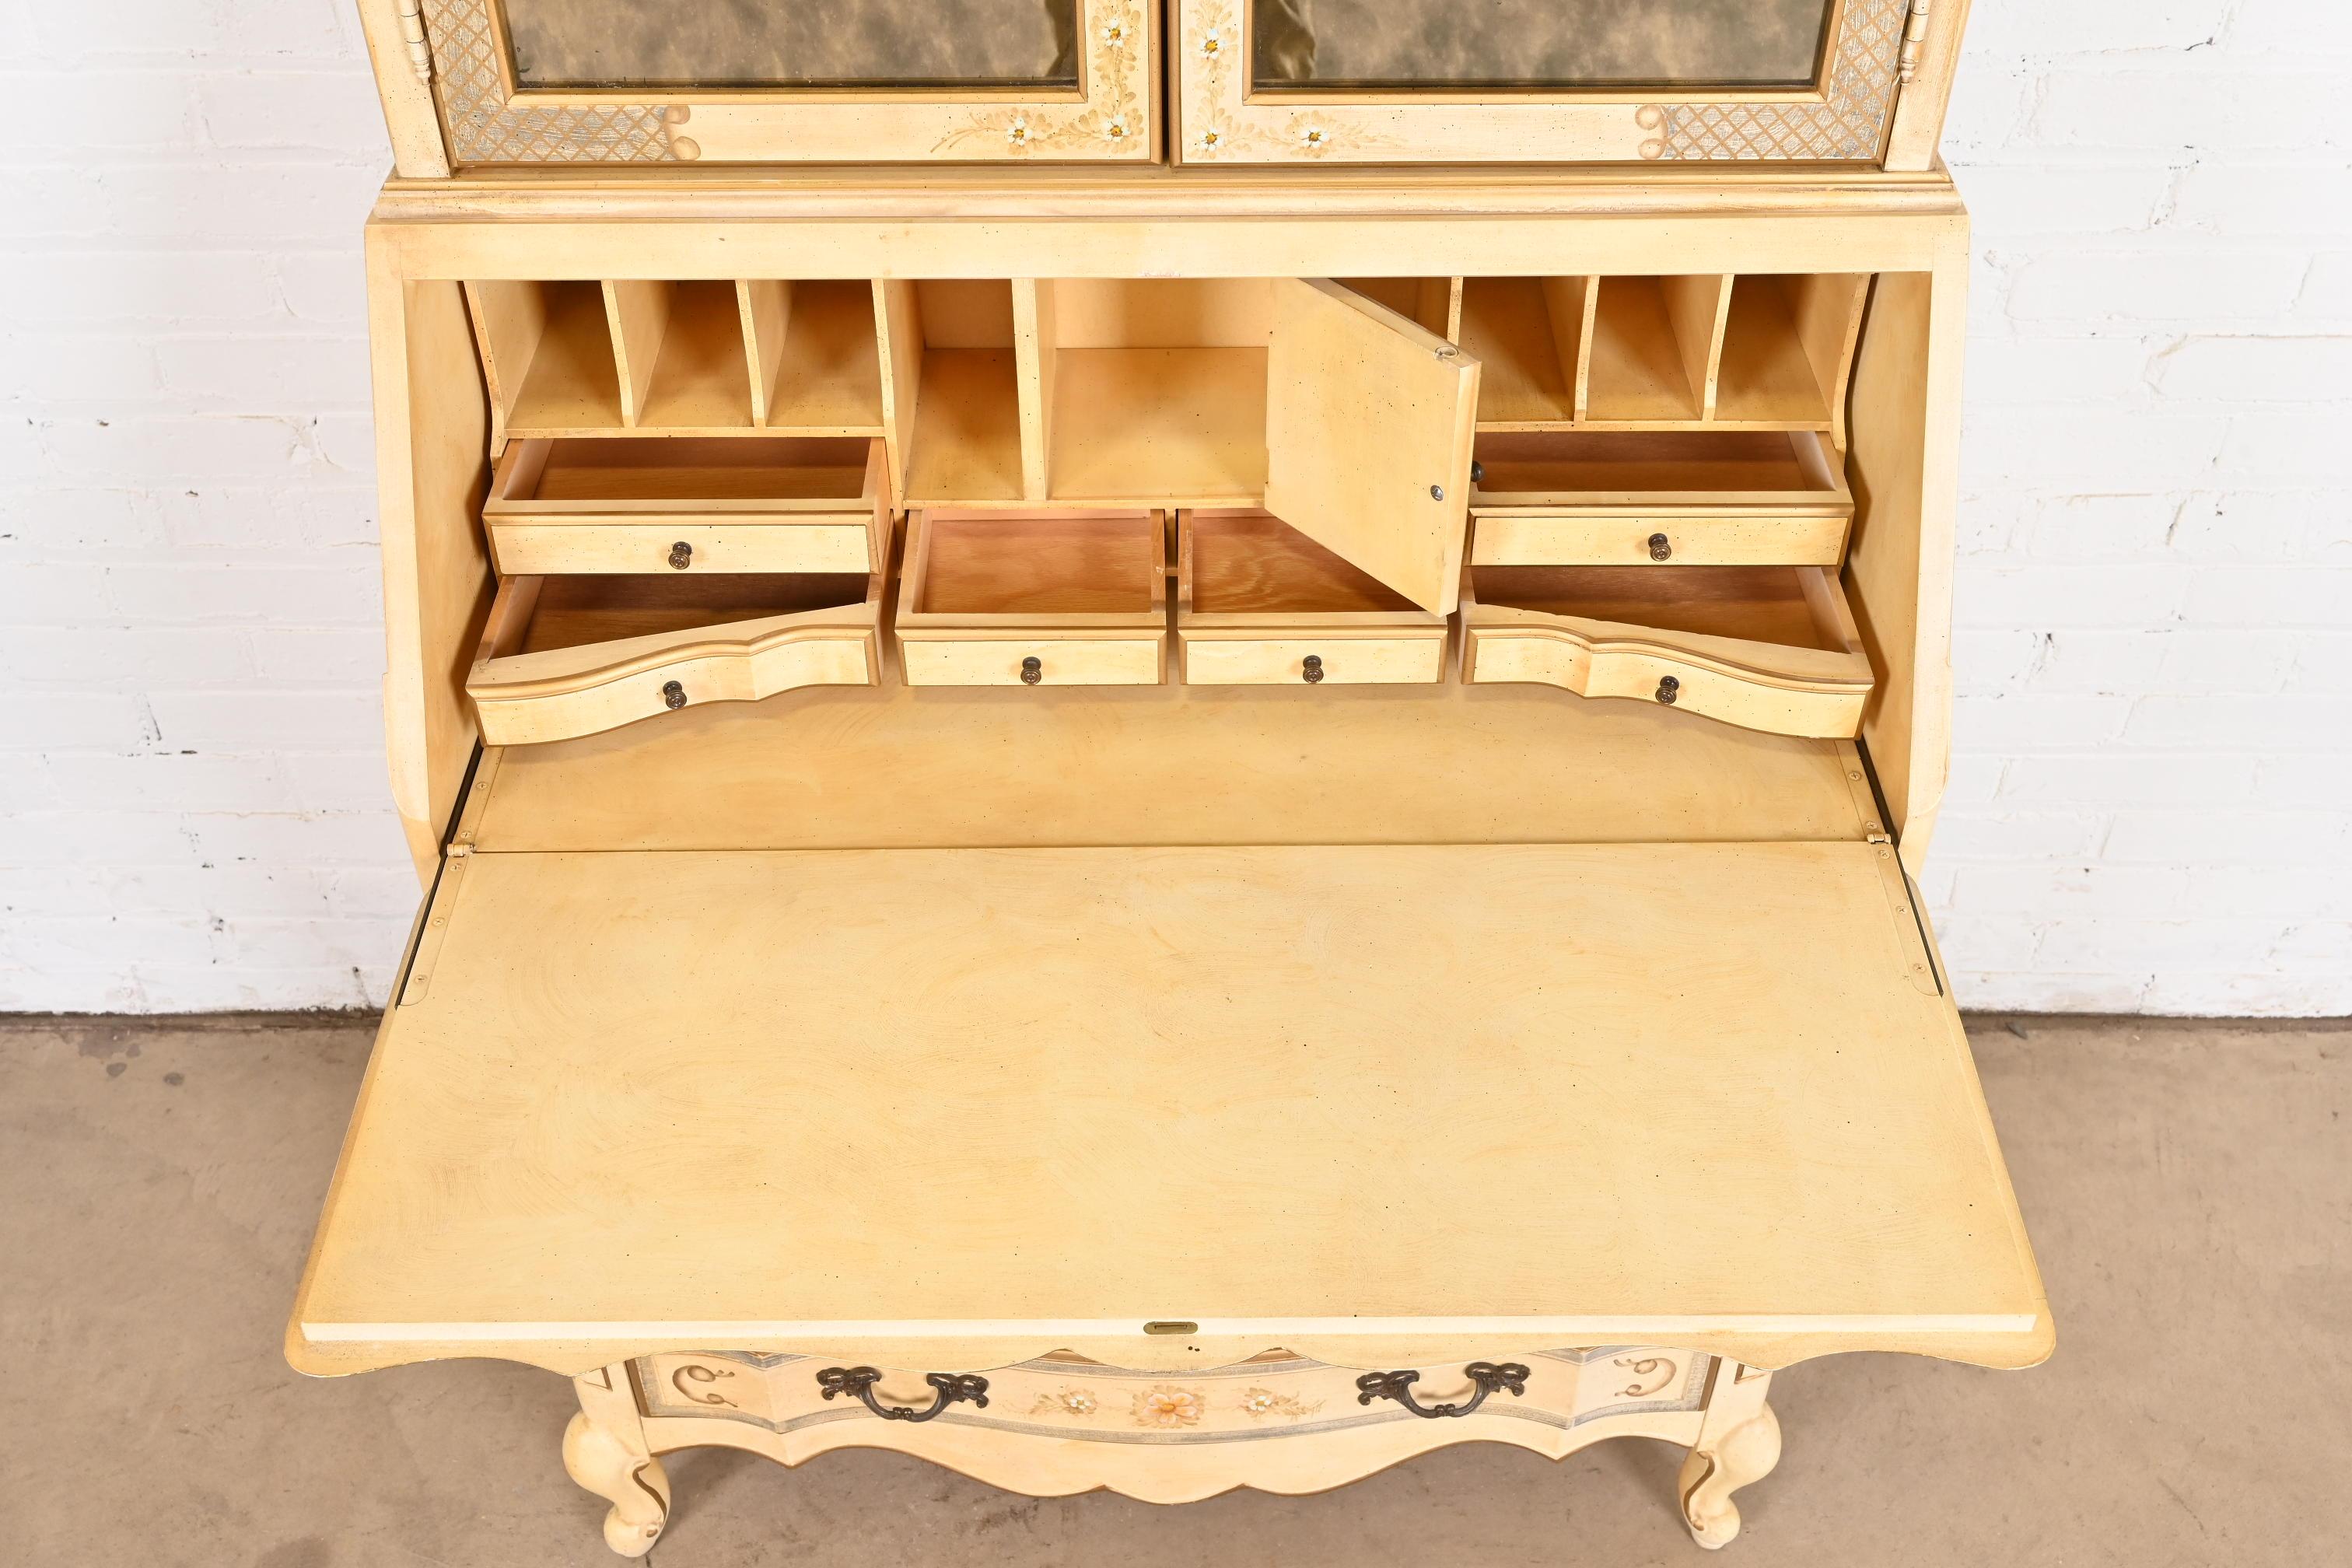 Maddox French Provincial Louis XV Painted Secretary Desk With Mirrored Bookcase For Sale 4